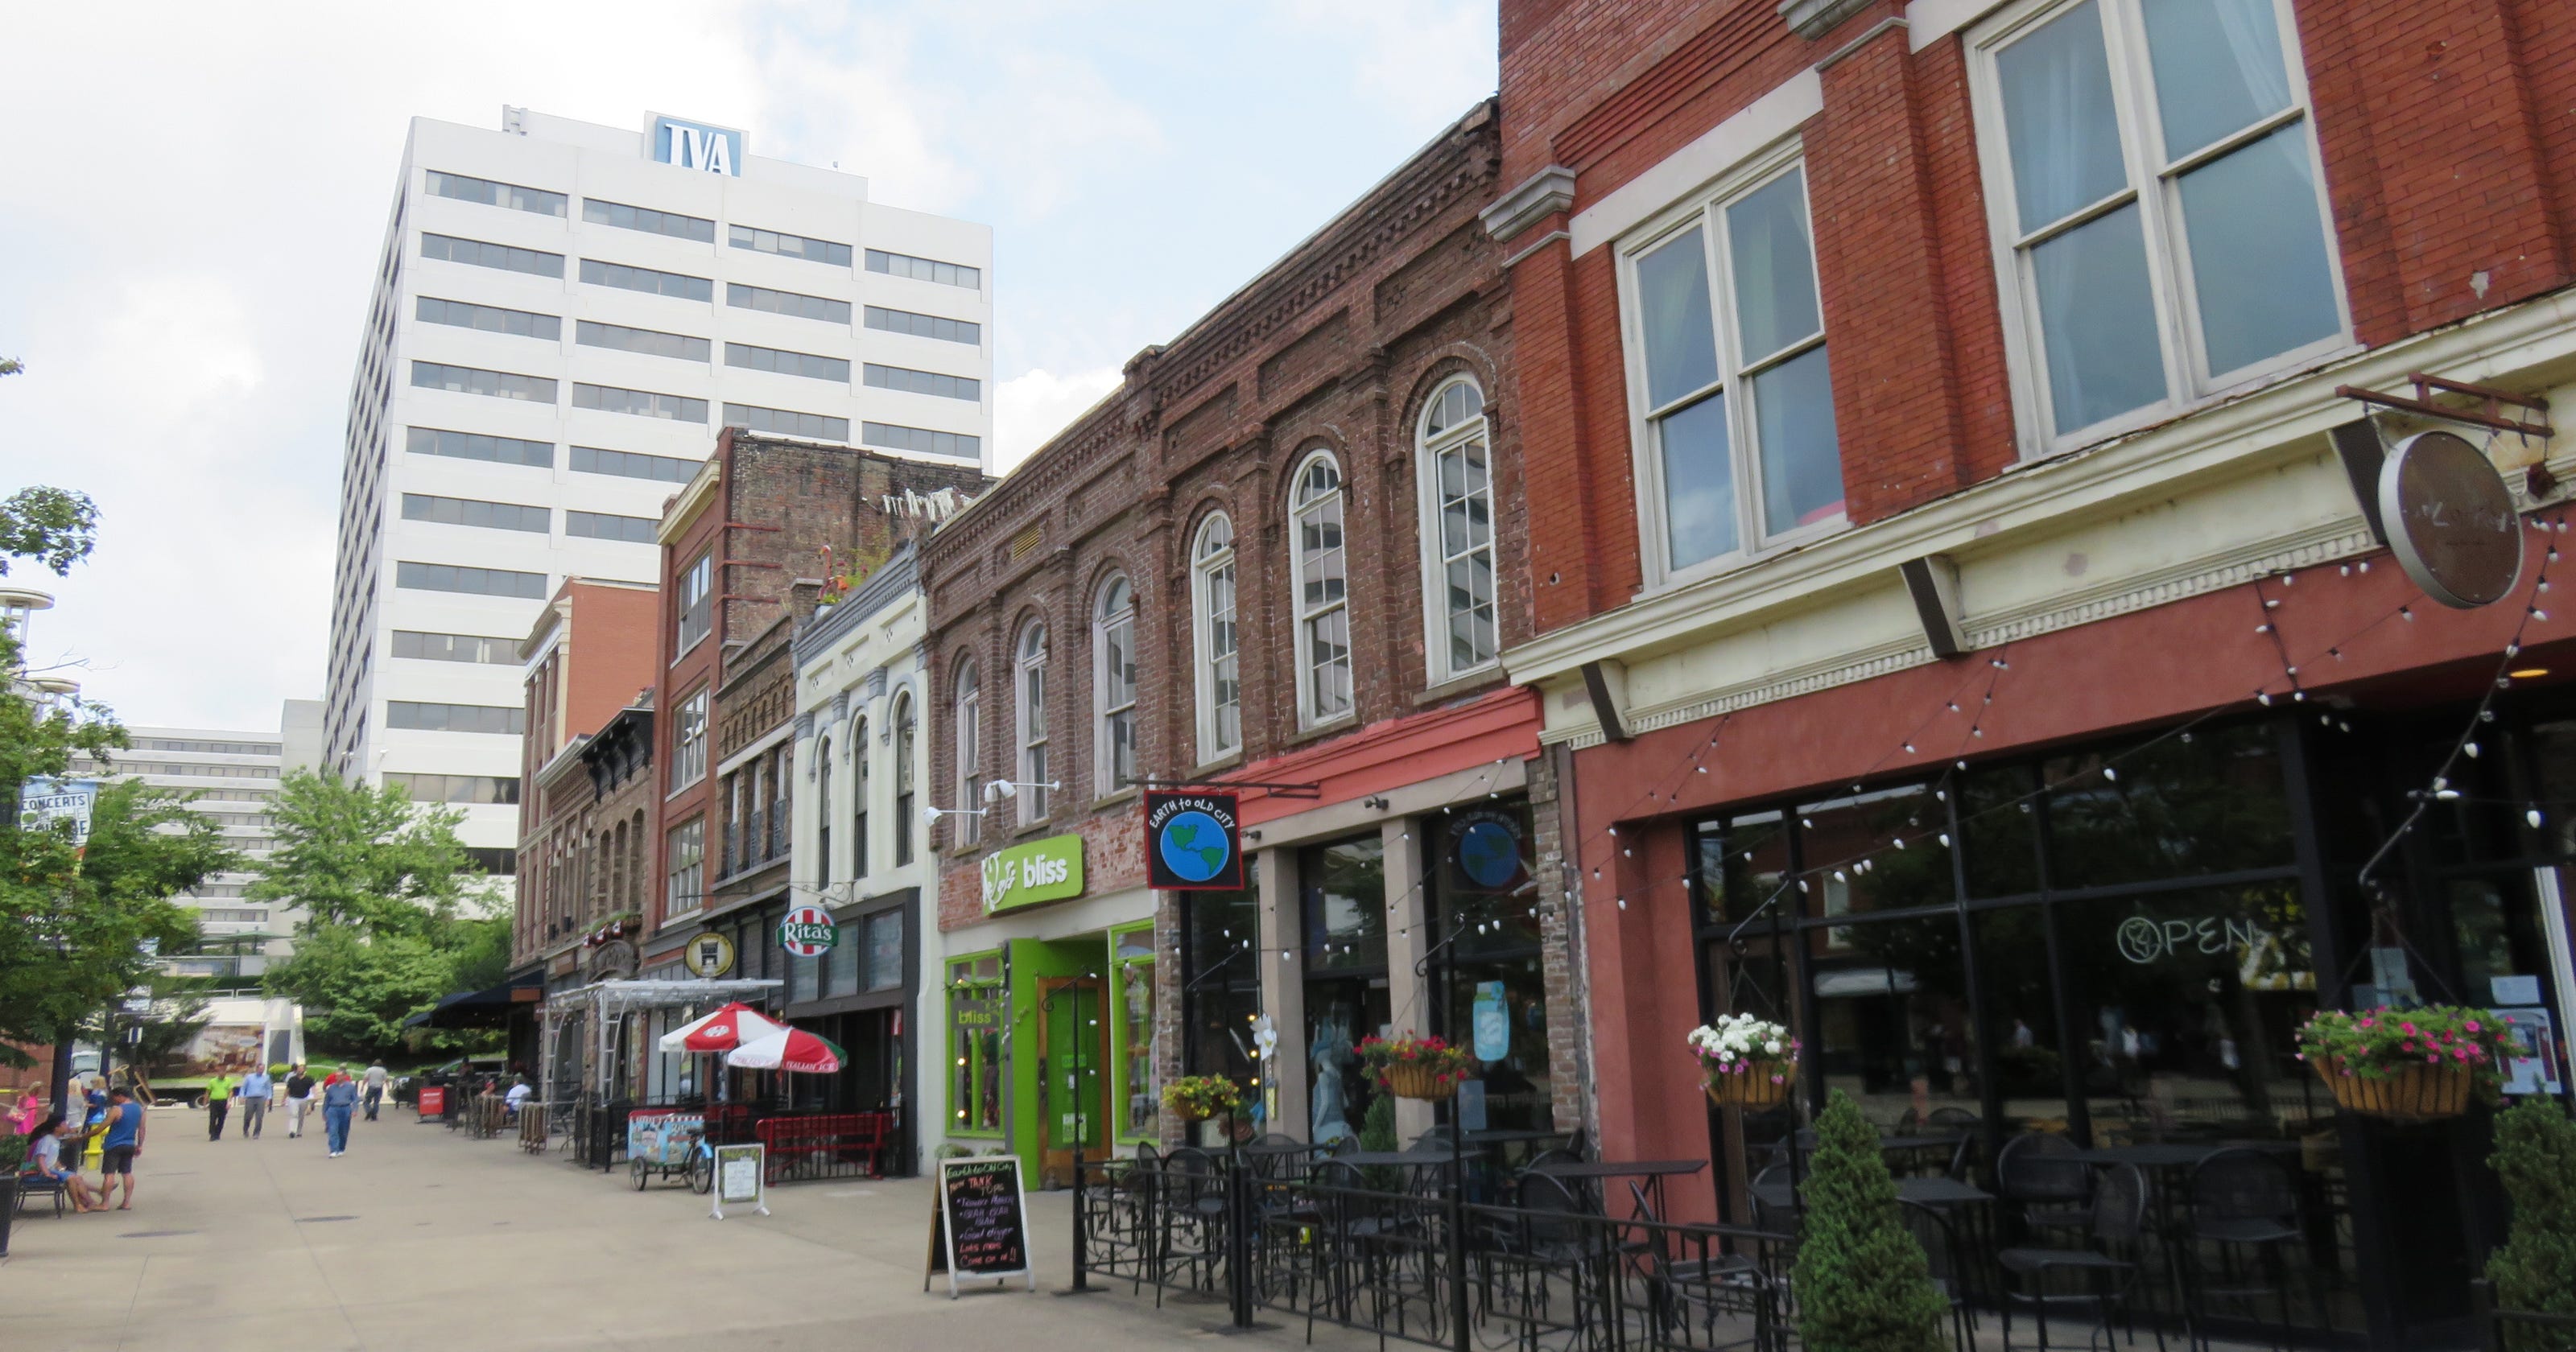 Knoxville's Market Square offers history, heart and soul